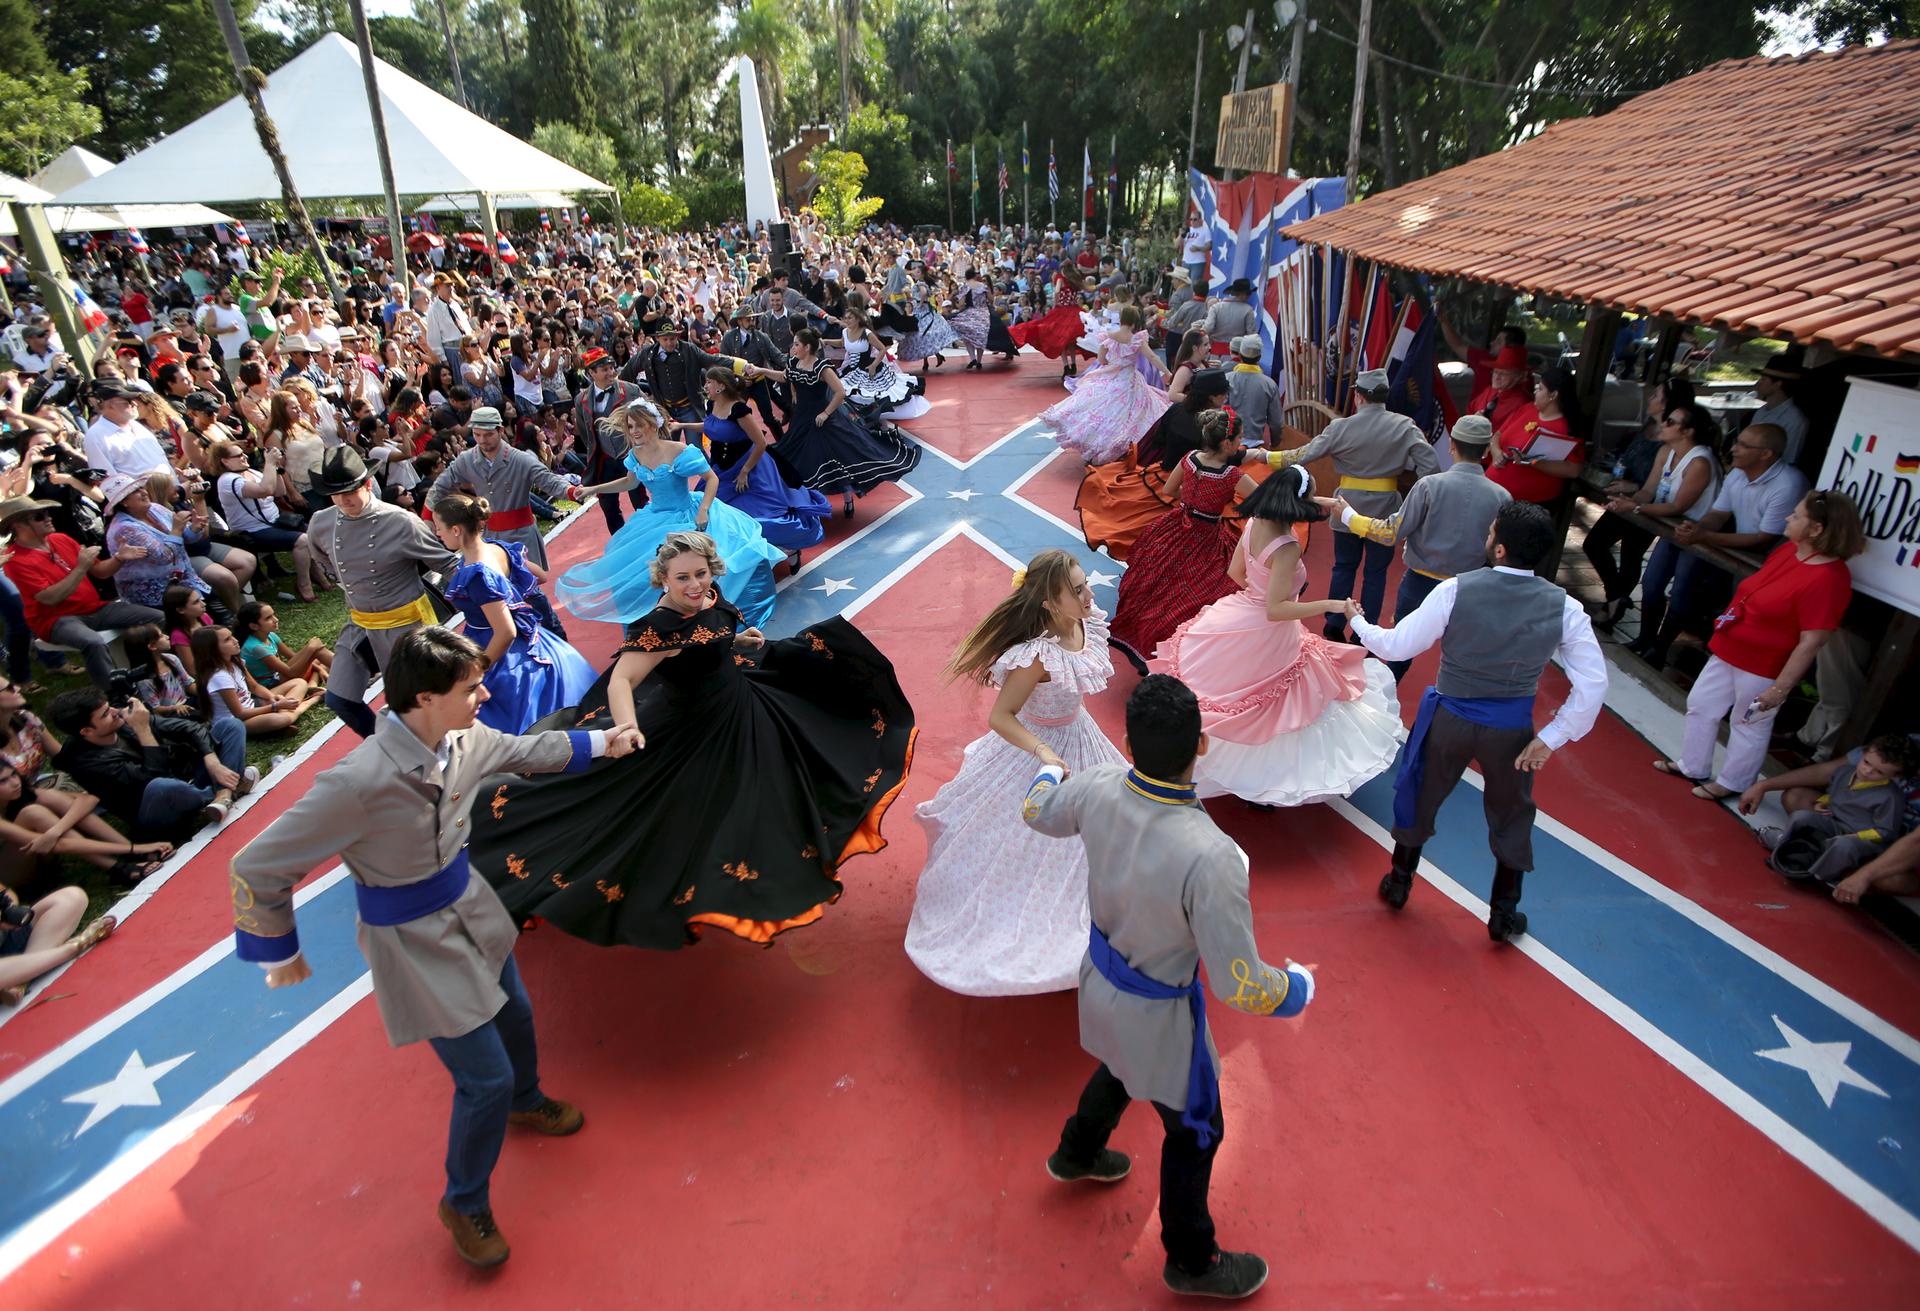 Descendants of American Southerners wearing Confederate-era dresses and uniforms dance during a party to celebrate the 150th anniversary of the end of the American Civil War in Santa Barbara D'Oeste, Brazil, April 26, 2015.